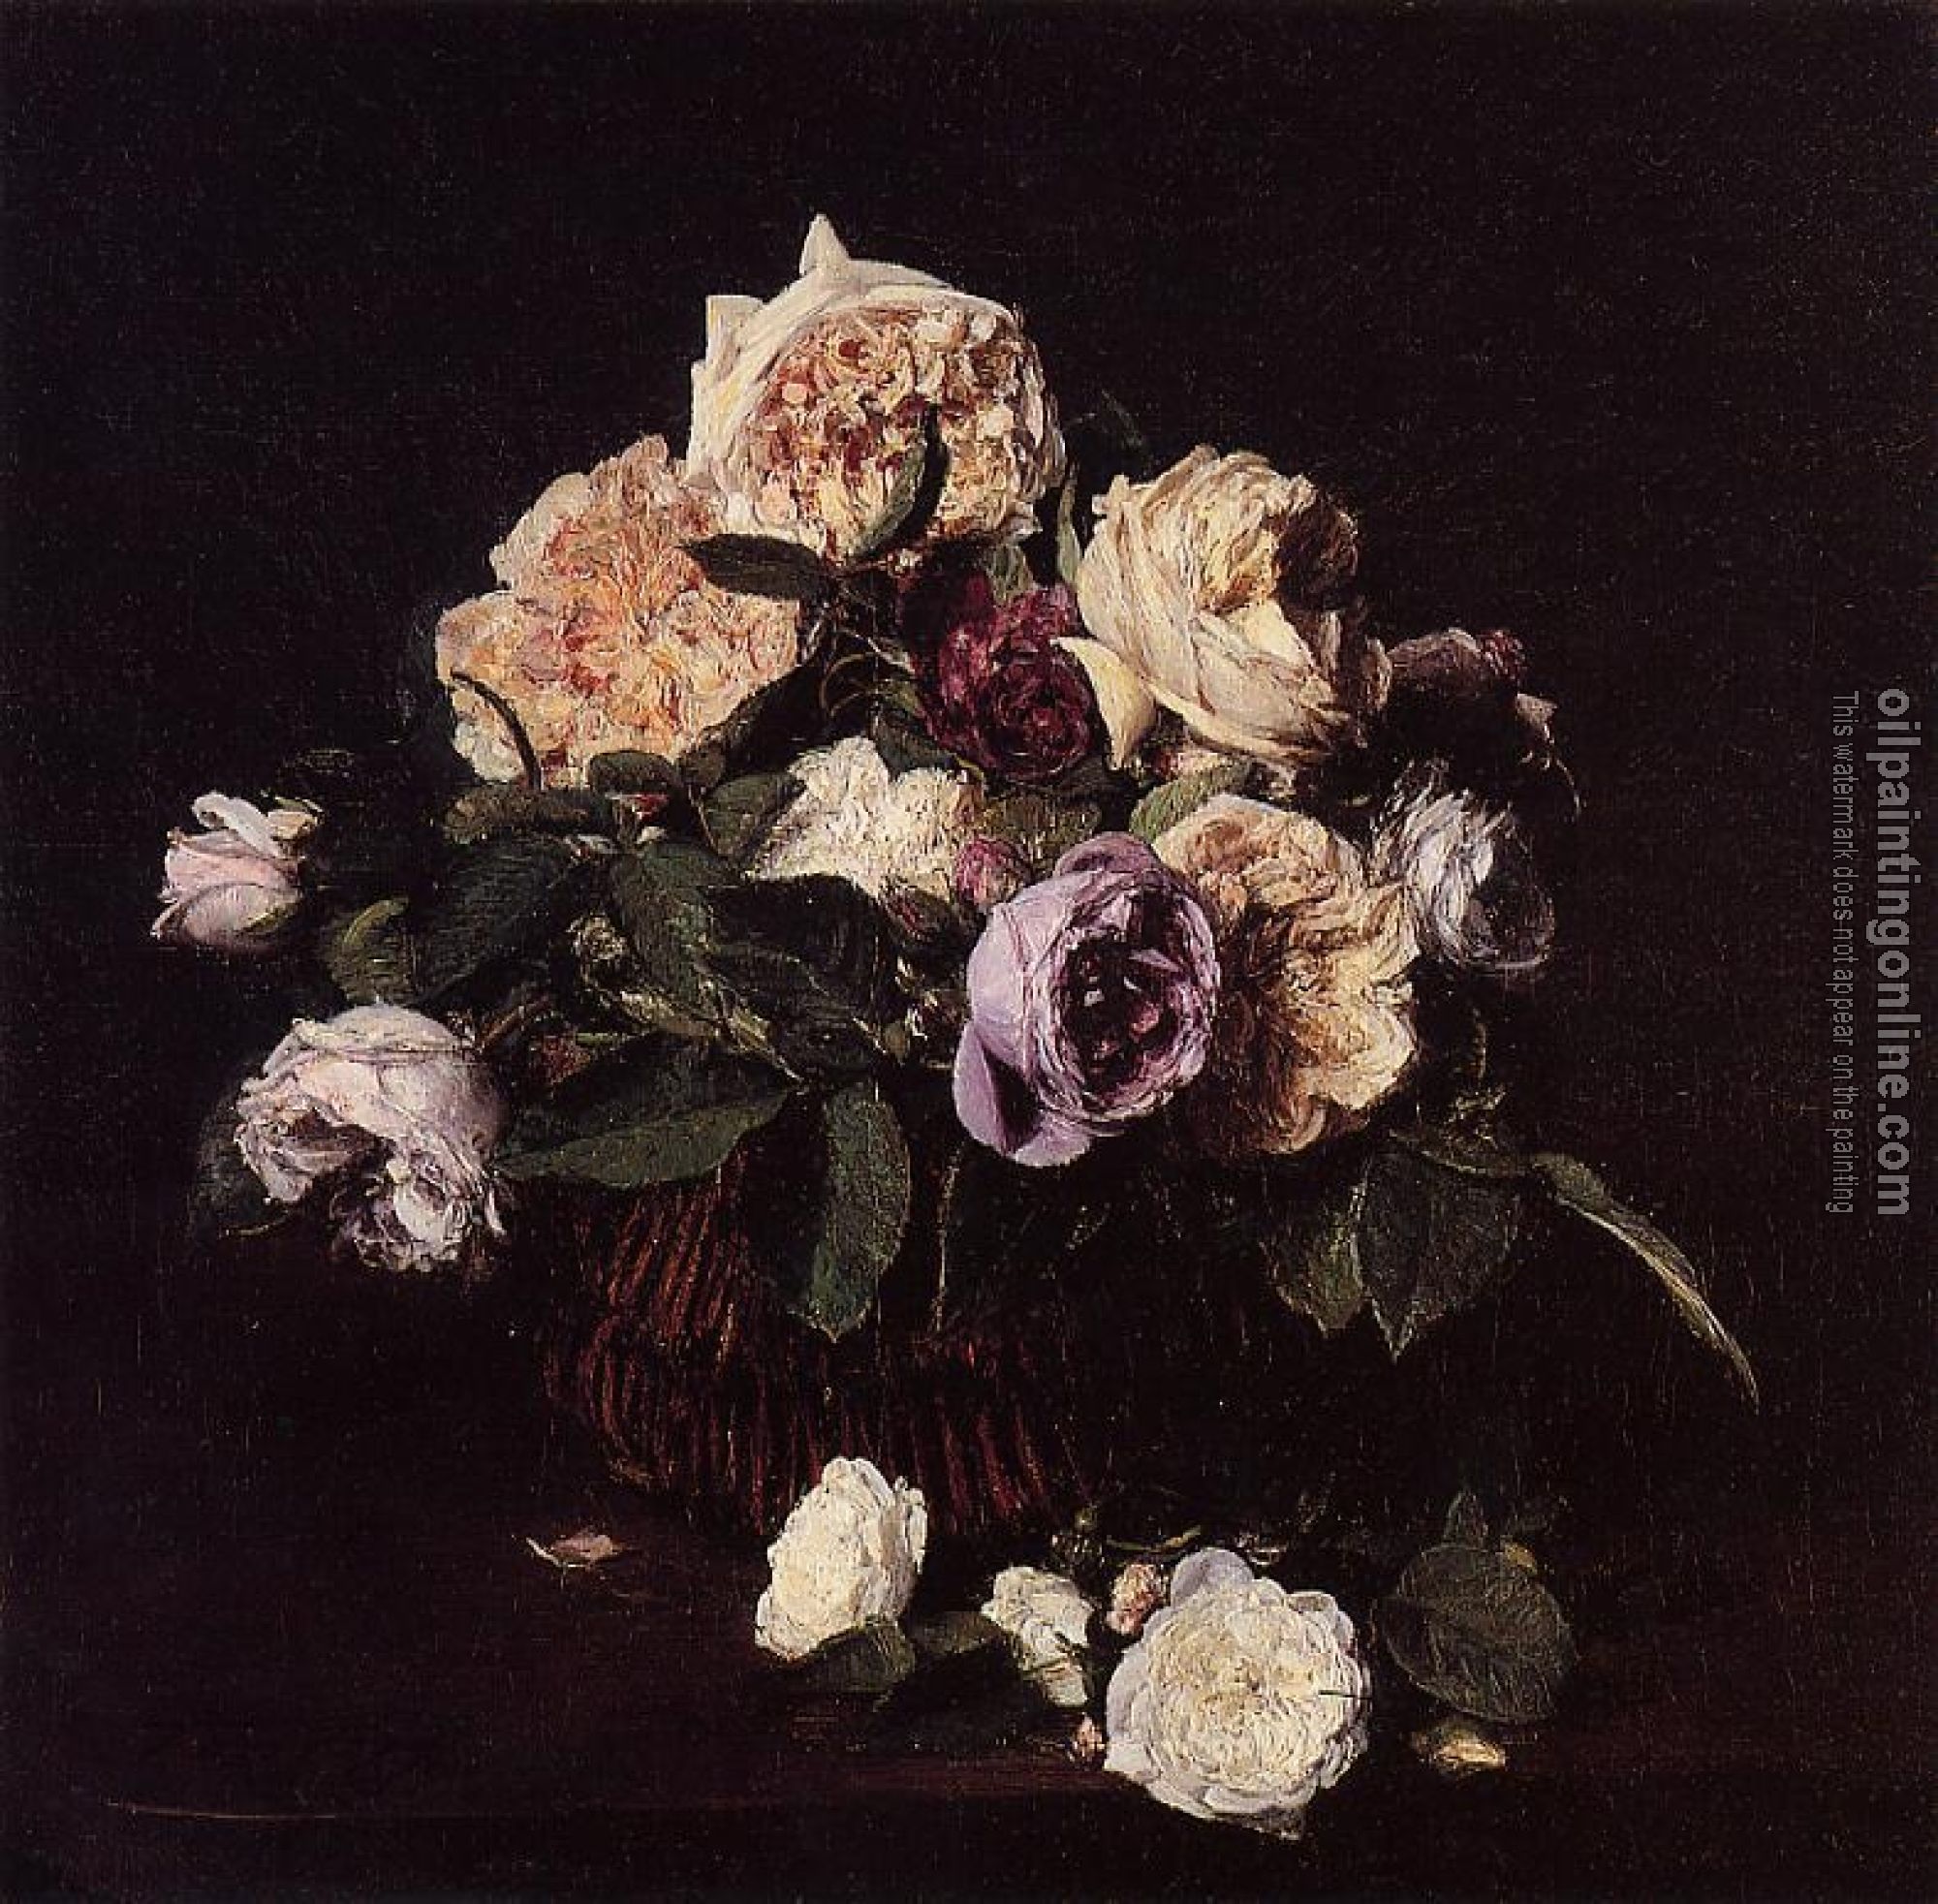 Fantin-Latour, Henri - Roses in a Basket on a Table